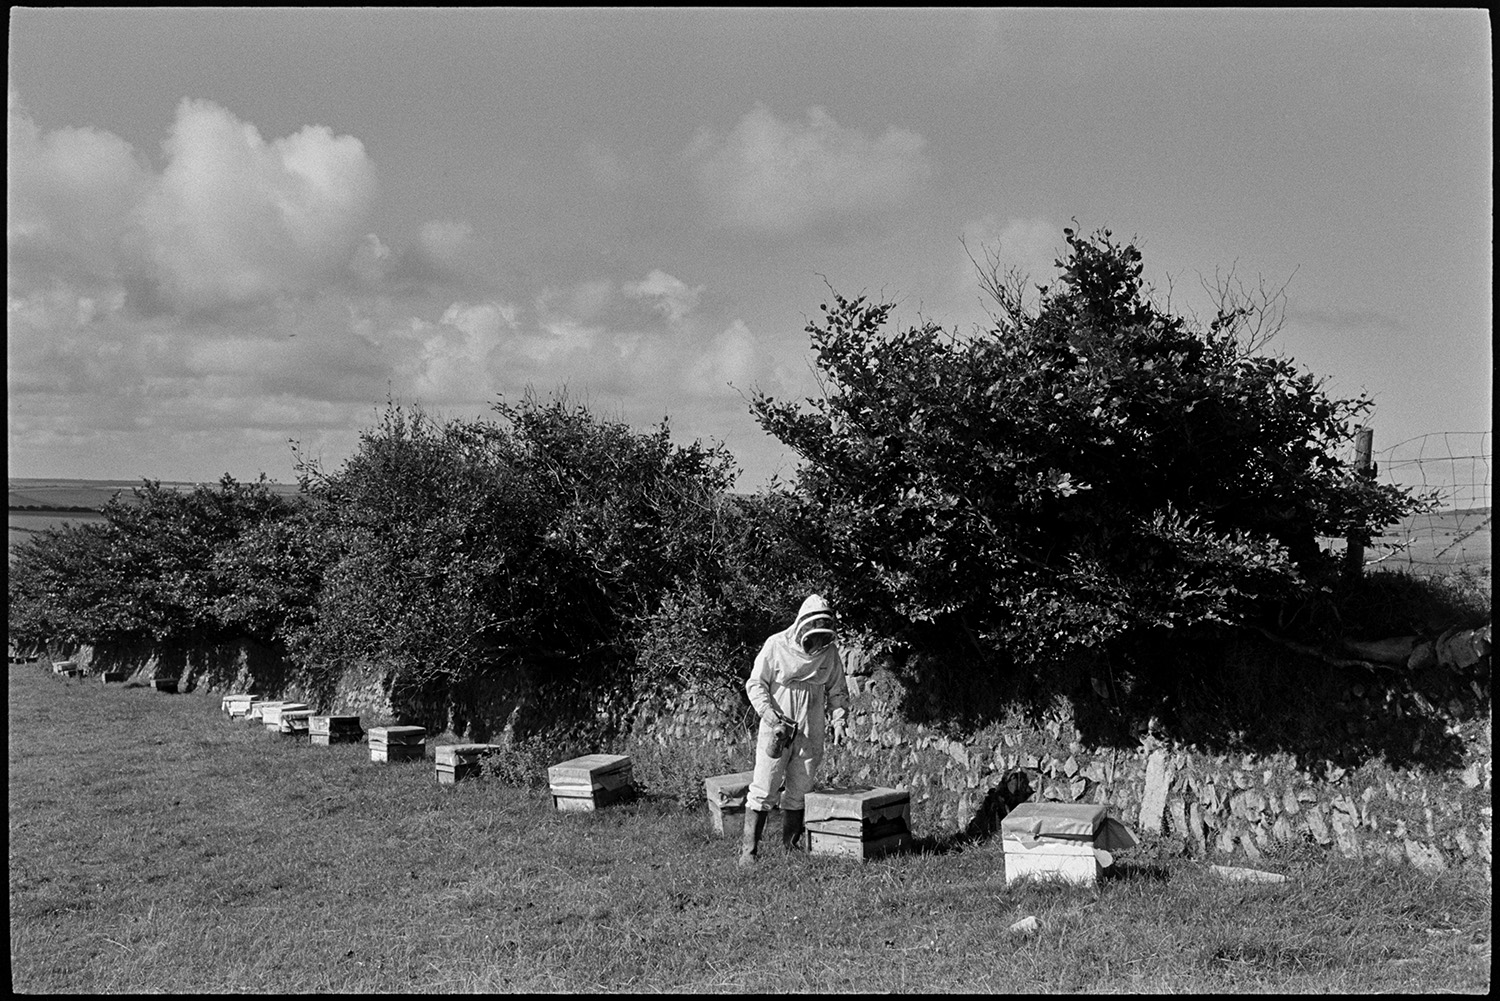 Man tending bees in hives in moorland landscape. 
[Bill Ludgate checking bee hives along a stone wall and hedge in a field near Woody Bay.]